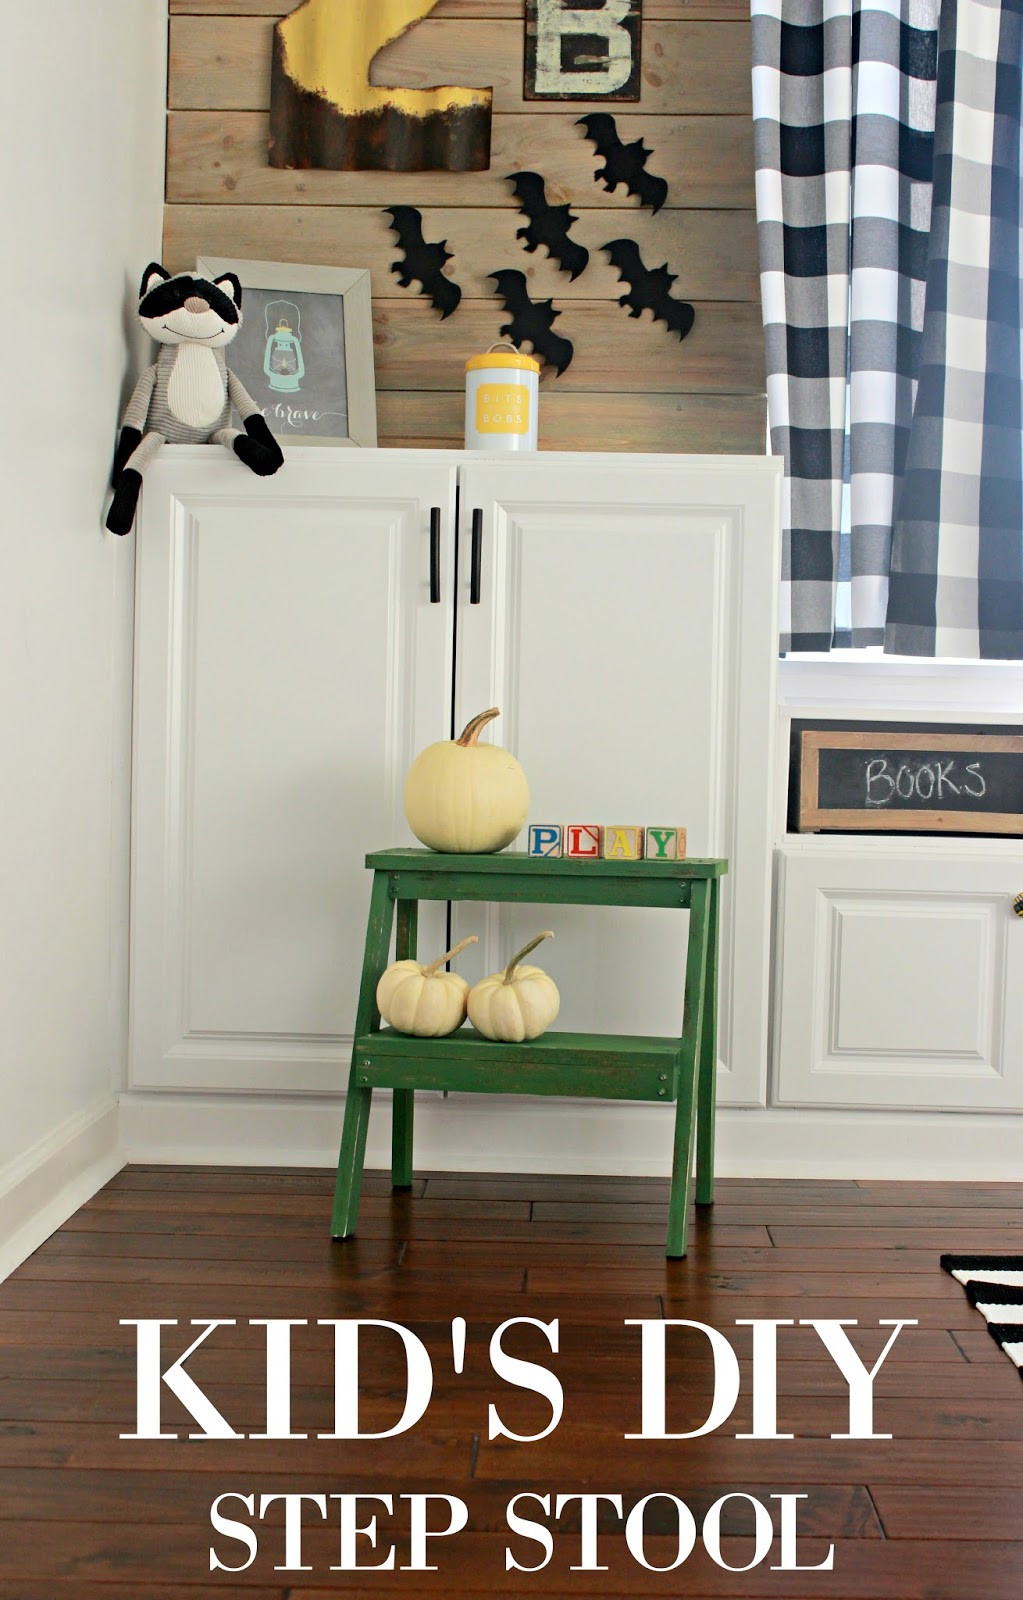 DIY Step Stool For Toddler
 Kid s DIY Step Stool and a New Chalk Paint Adventure